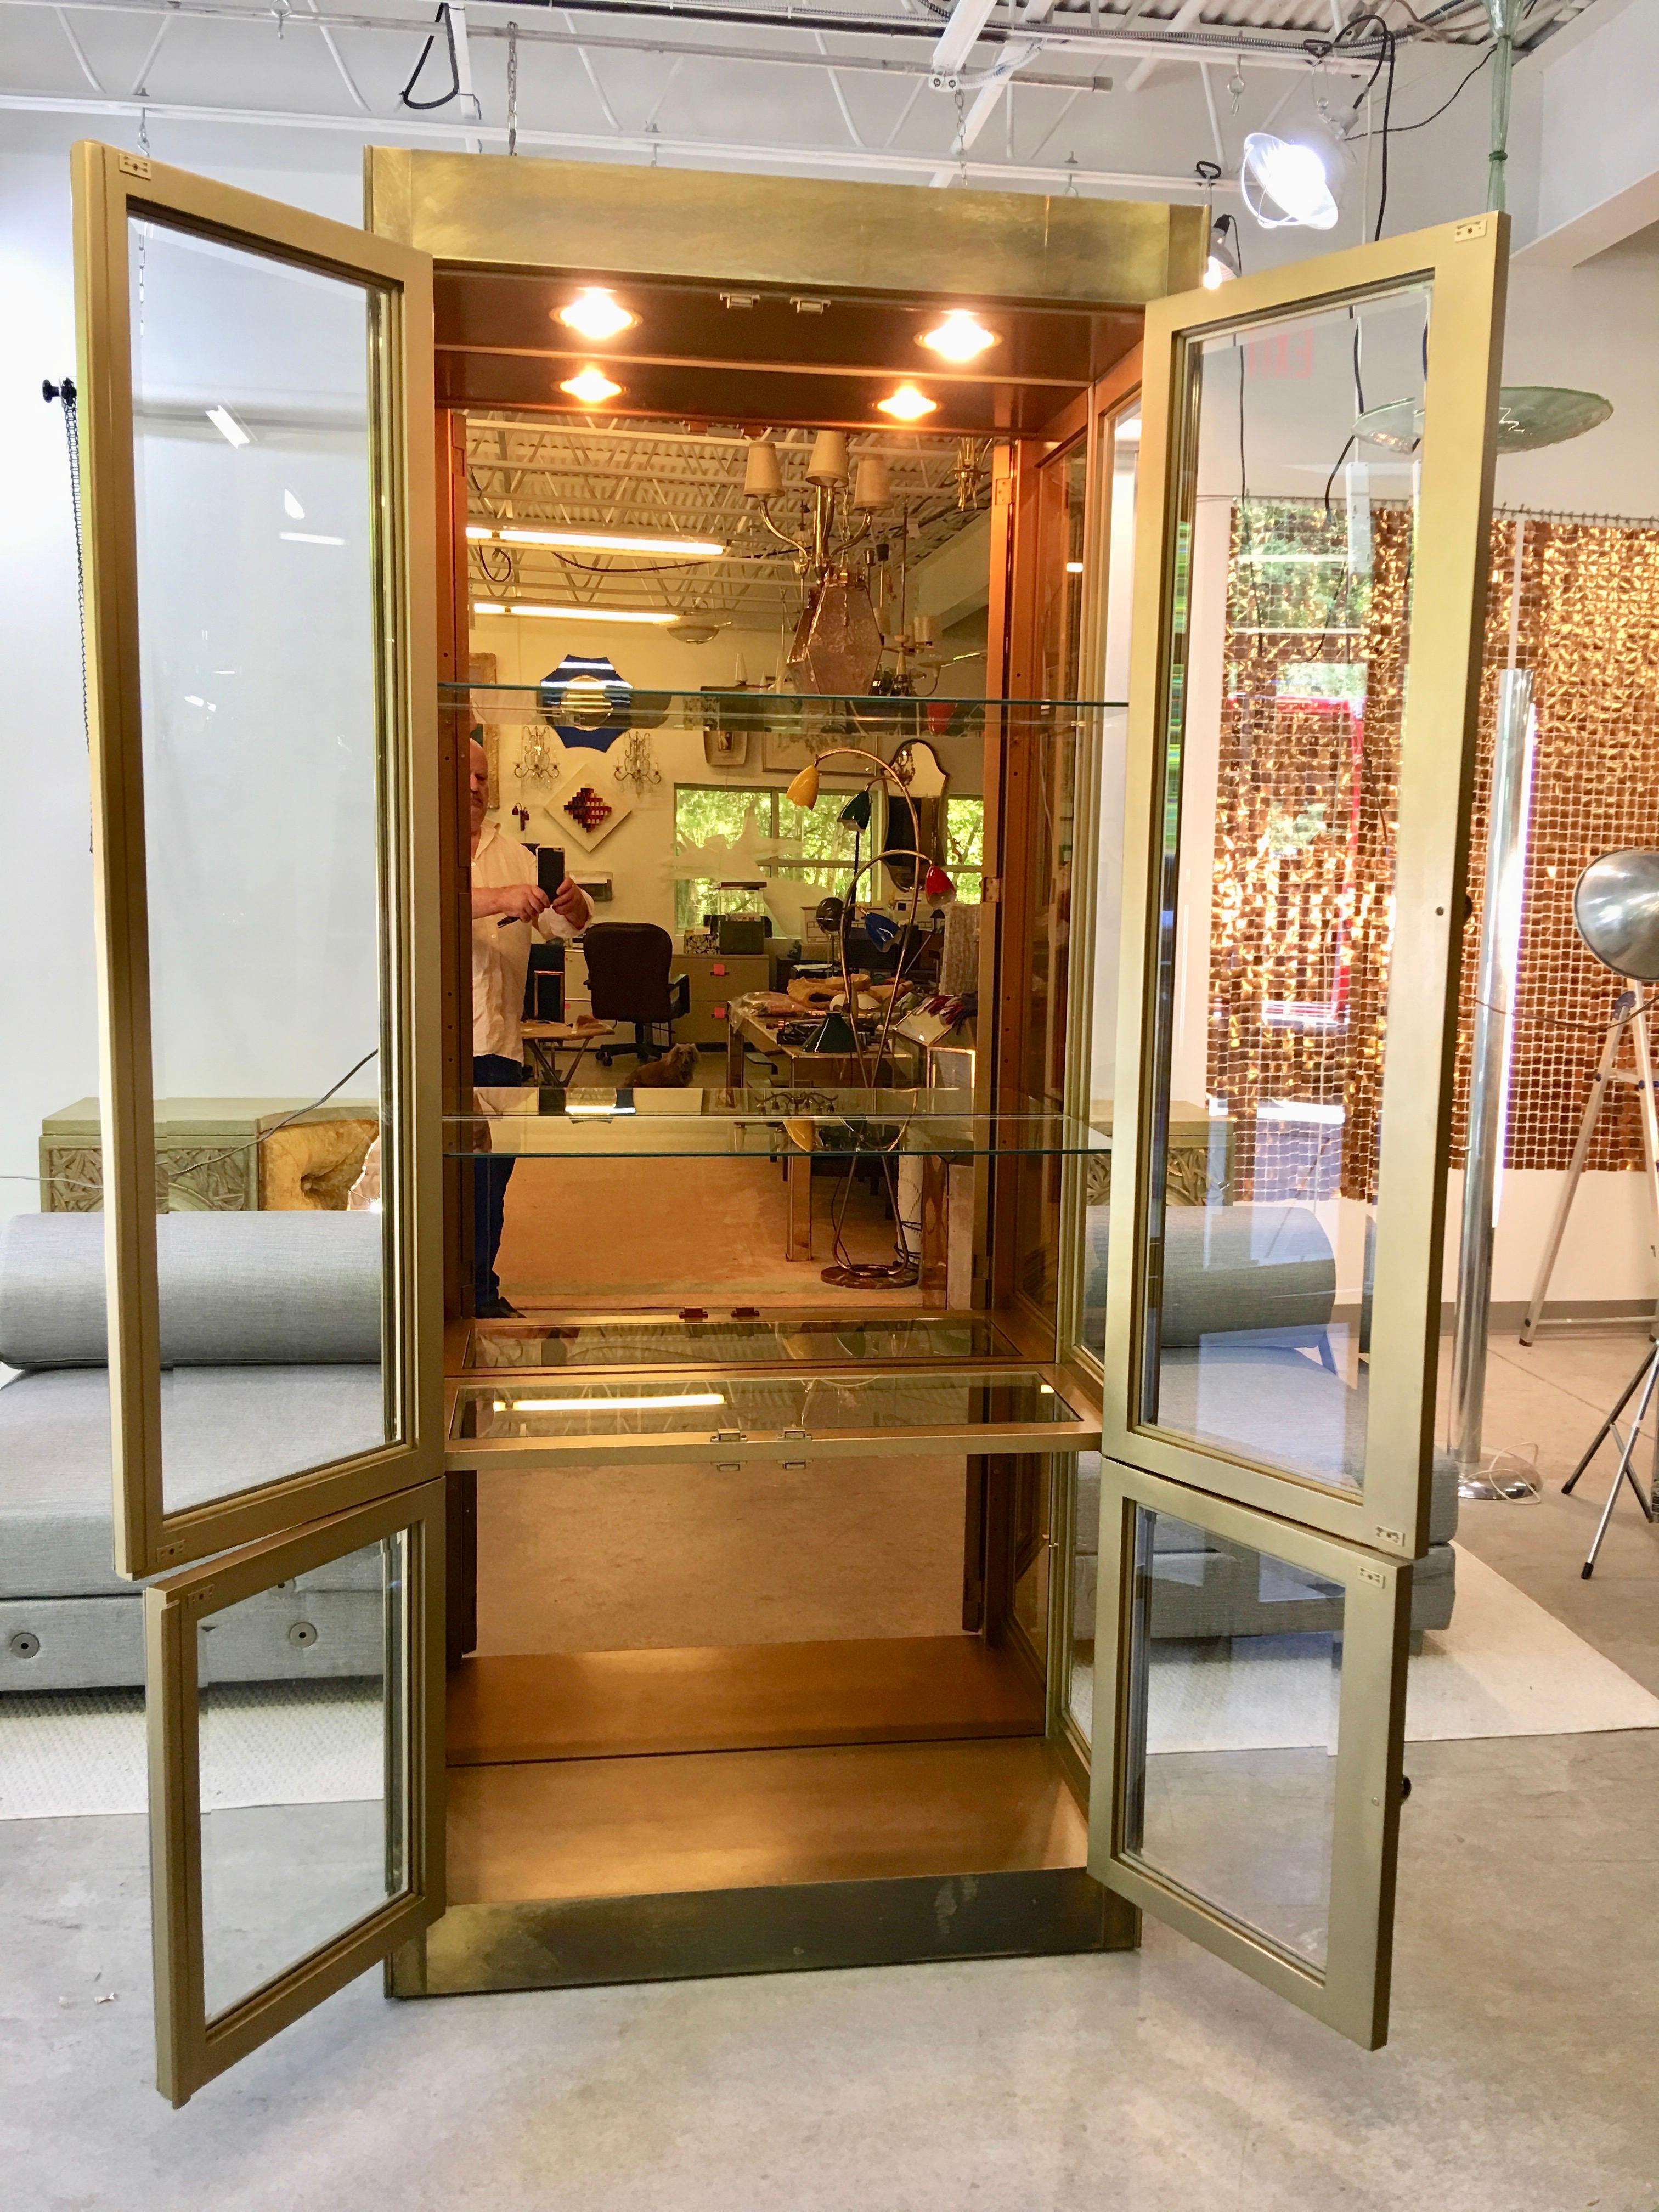 Mastercraft Brass & Glass Vitrine In Good Condition For Sale In Hanover, MA